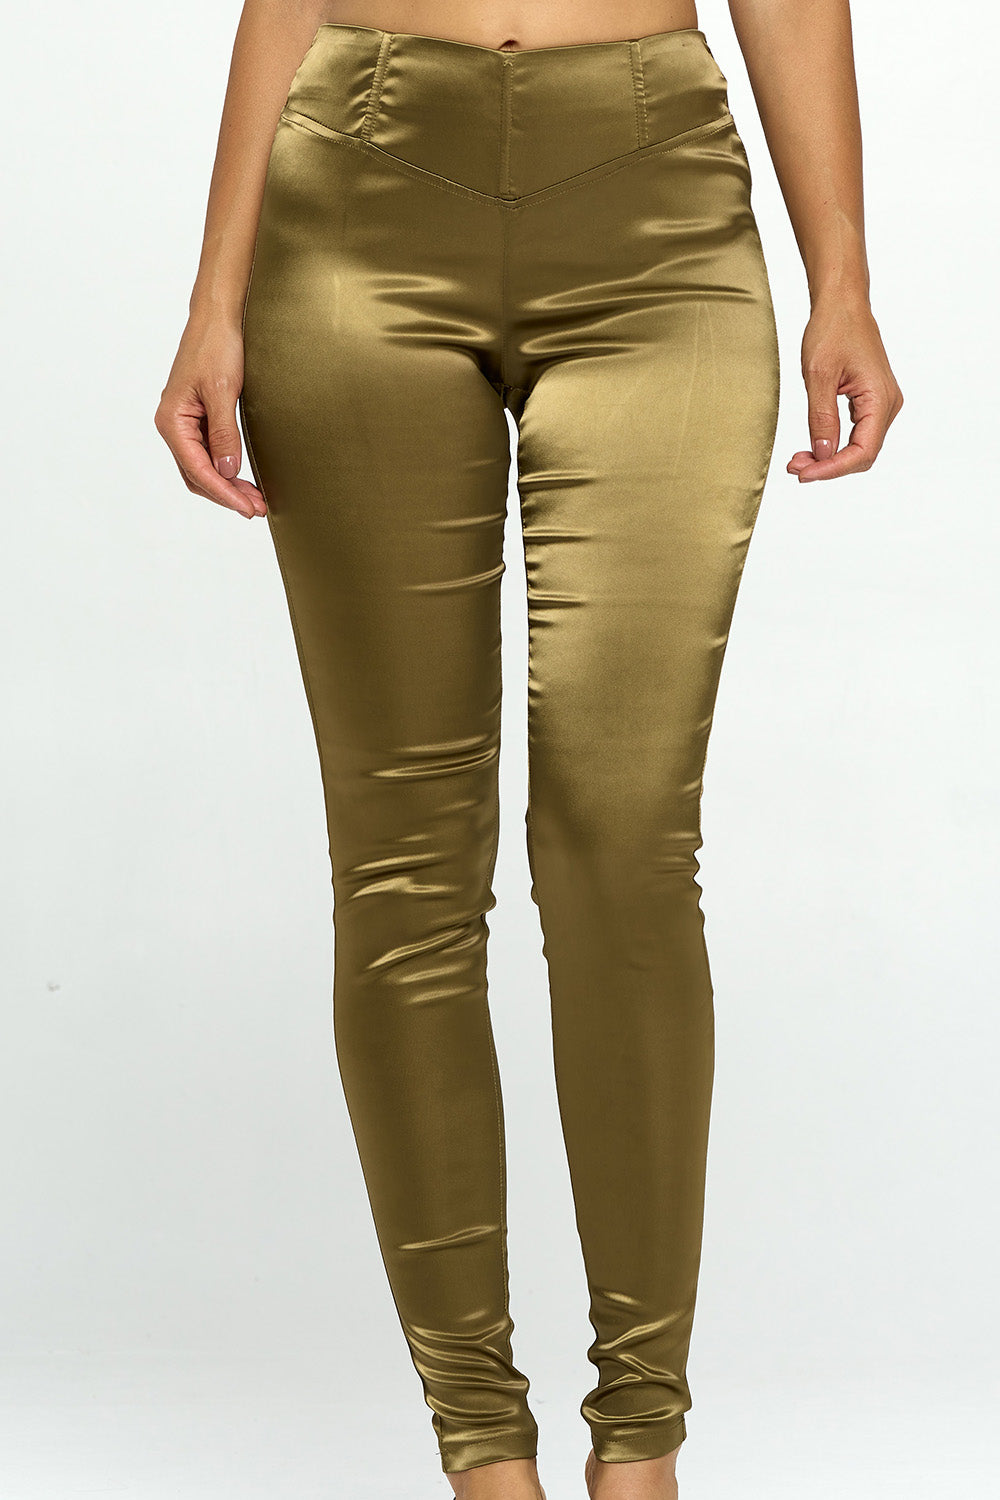 Shiny satin leggings with branded elastic in Brown for